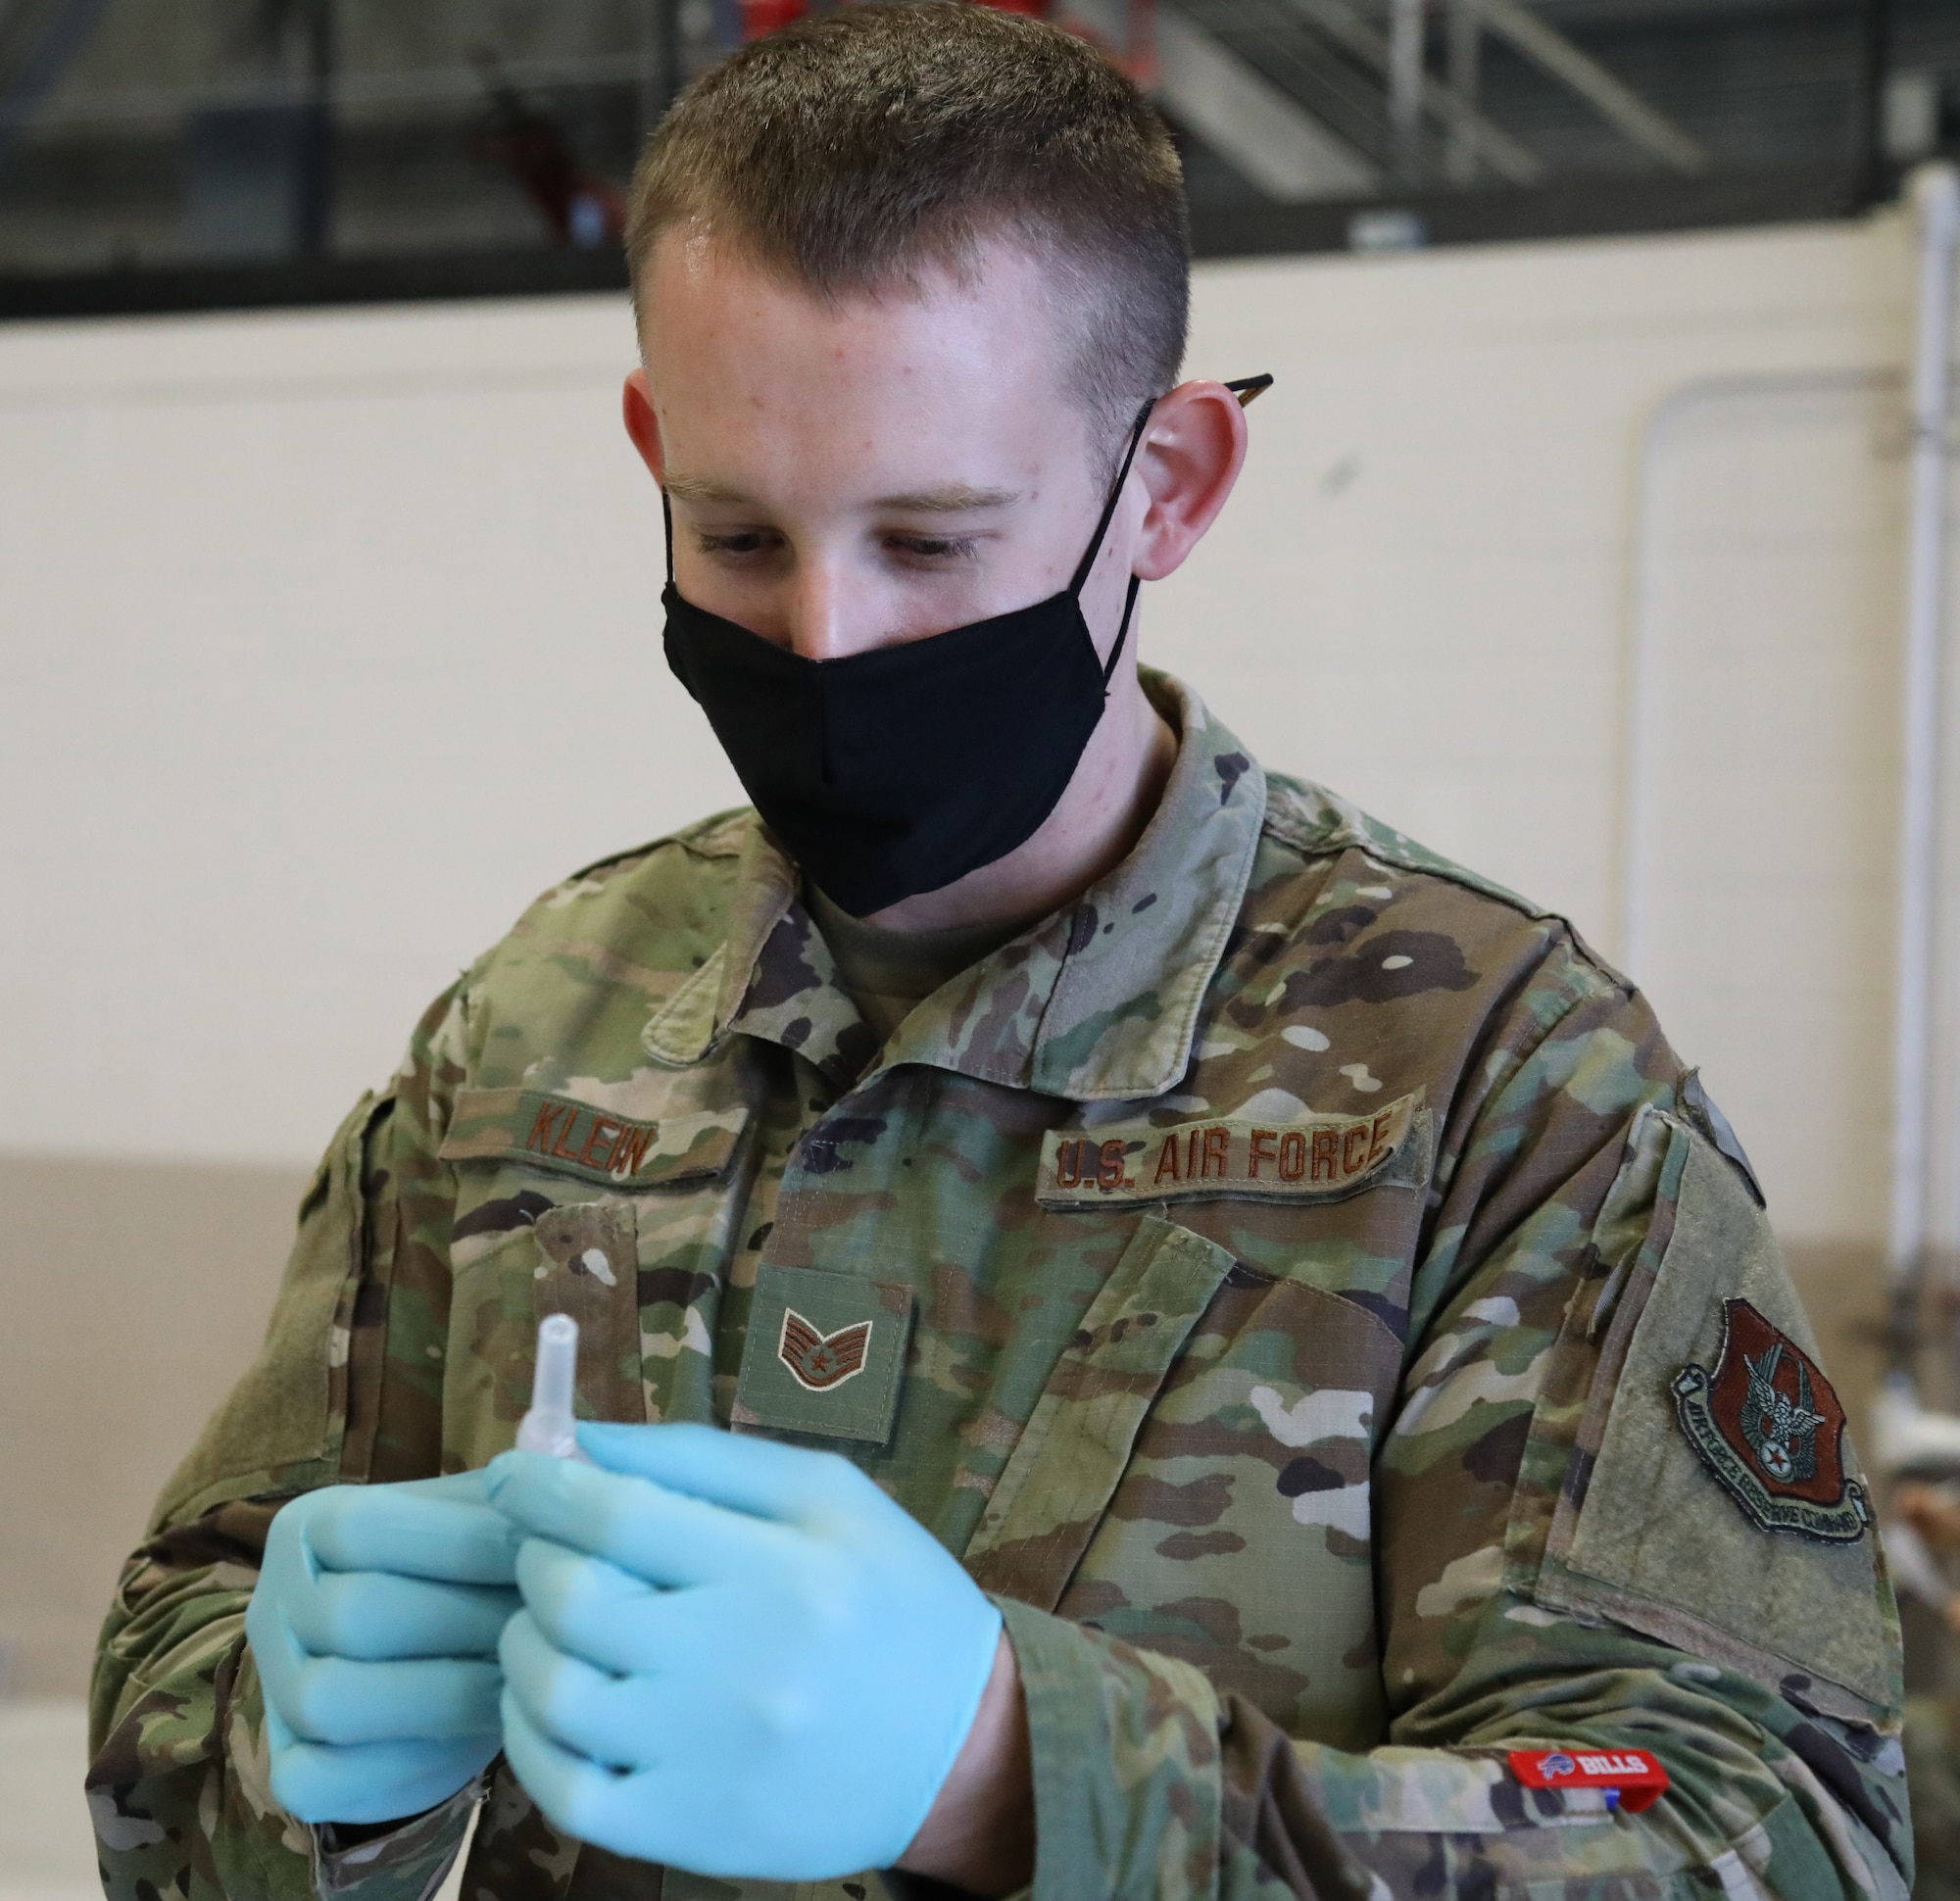 U.S. Air Force Staff Sgt. Shayne Klein, an aerospace medical technician with the 446th Aerospace Medicine Squadron here, puts a needle on a flu shot vaccine Nov. 8, 2020.